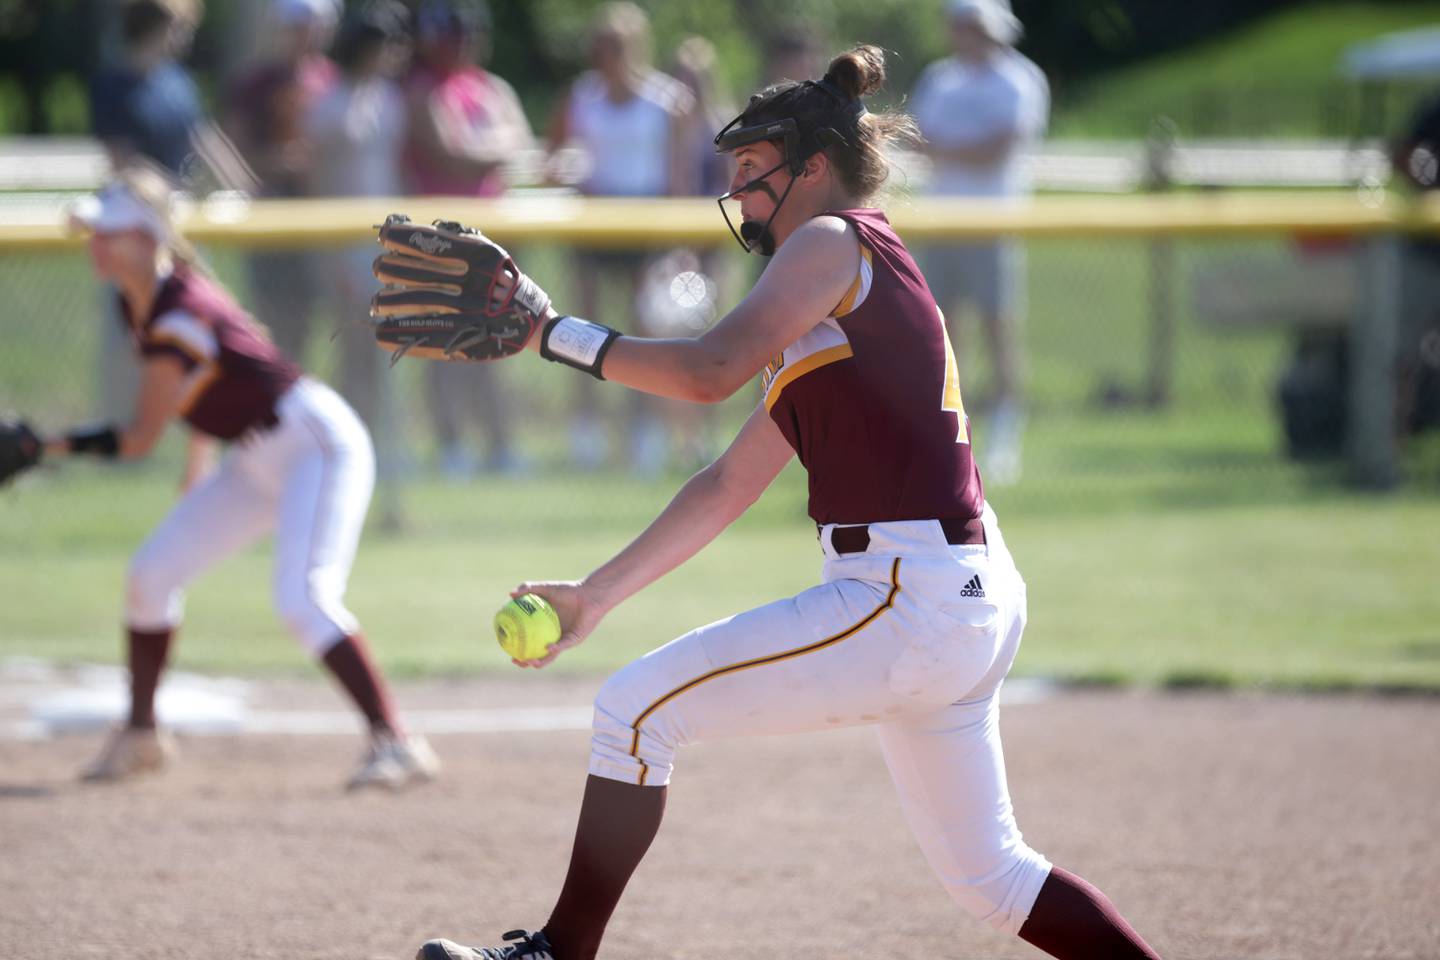 Montini Catholic High School’s Kora Navarro pitches during their softball Class 3A sectional final against Ridgewood High School in Lombard on Wednesday, June 10, 2021.